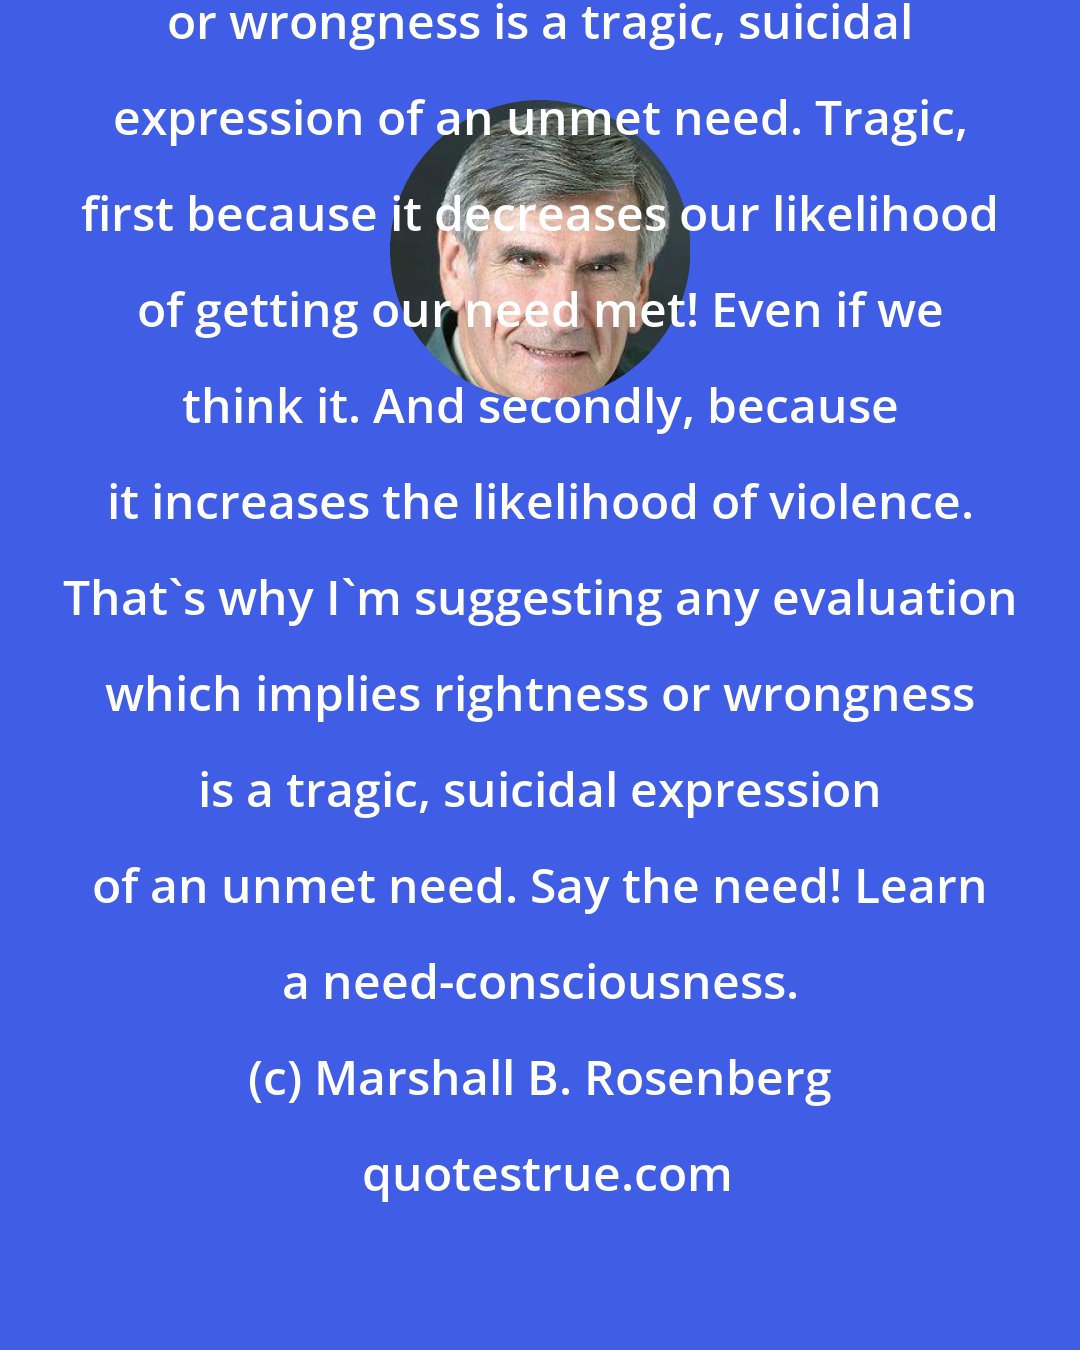 Marshall B. Rosenberg: Any evaluation which implies rightness or wrongness is a tragic, suicidal expression of an unmet need. Tragic, first because it decreases our likelihood of getting our need met! Even if we think it. And secondly, because it increases the likelihood of violence. That's why I'm suggesting any evaluation which implies rightness or wrongness is a tragic, suicidal expression of an unmet need. Say the need! Learn a need-consciousness.